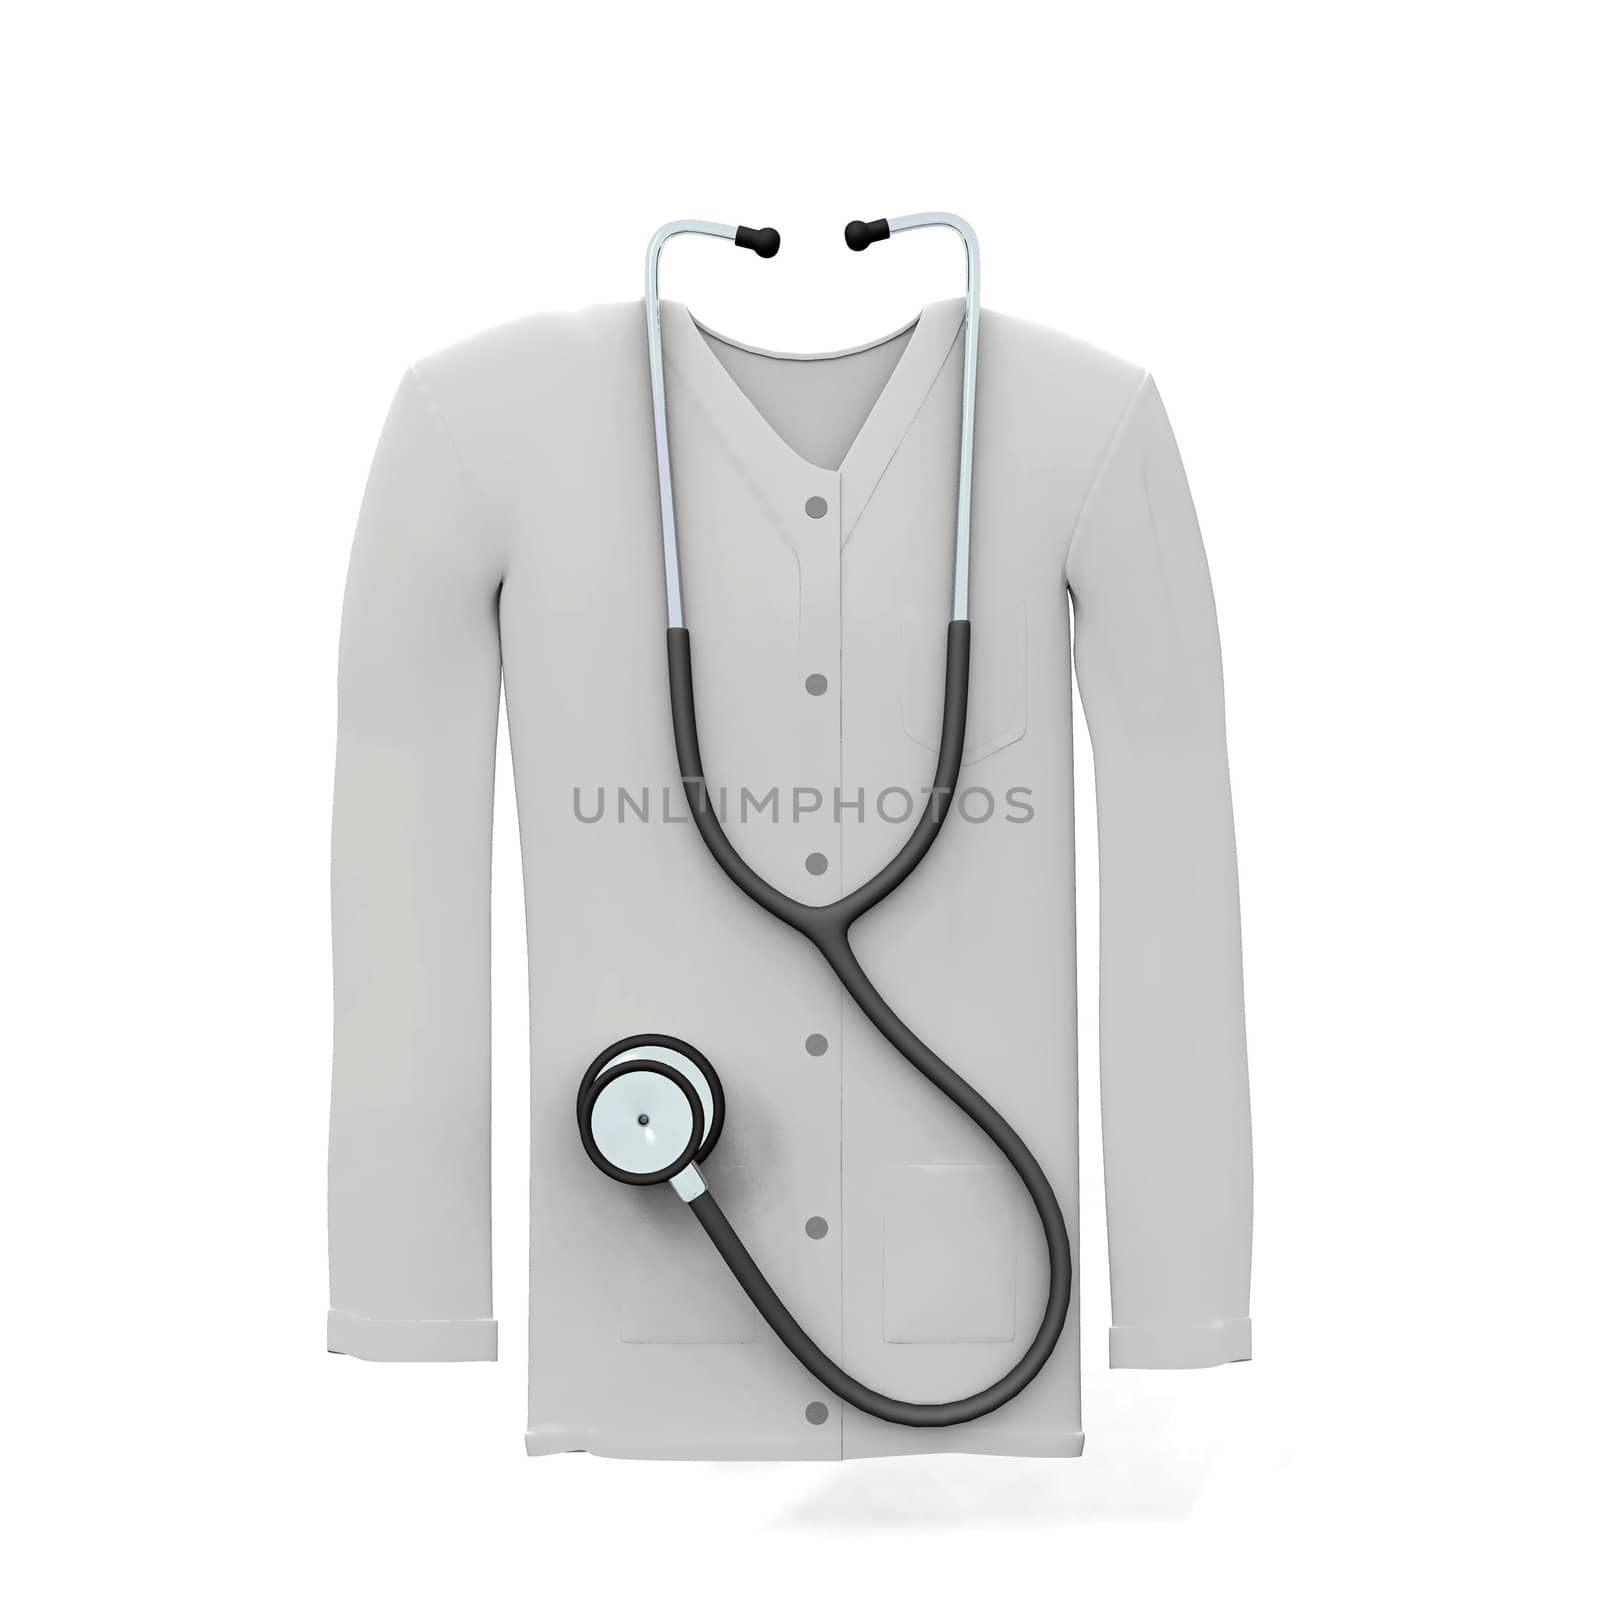 the stethoscope and the cardigan by njaj